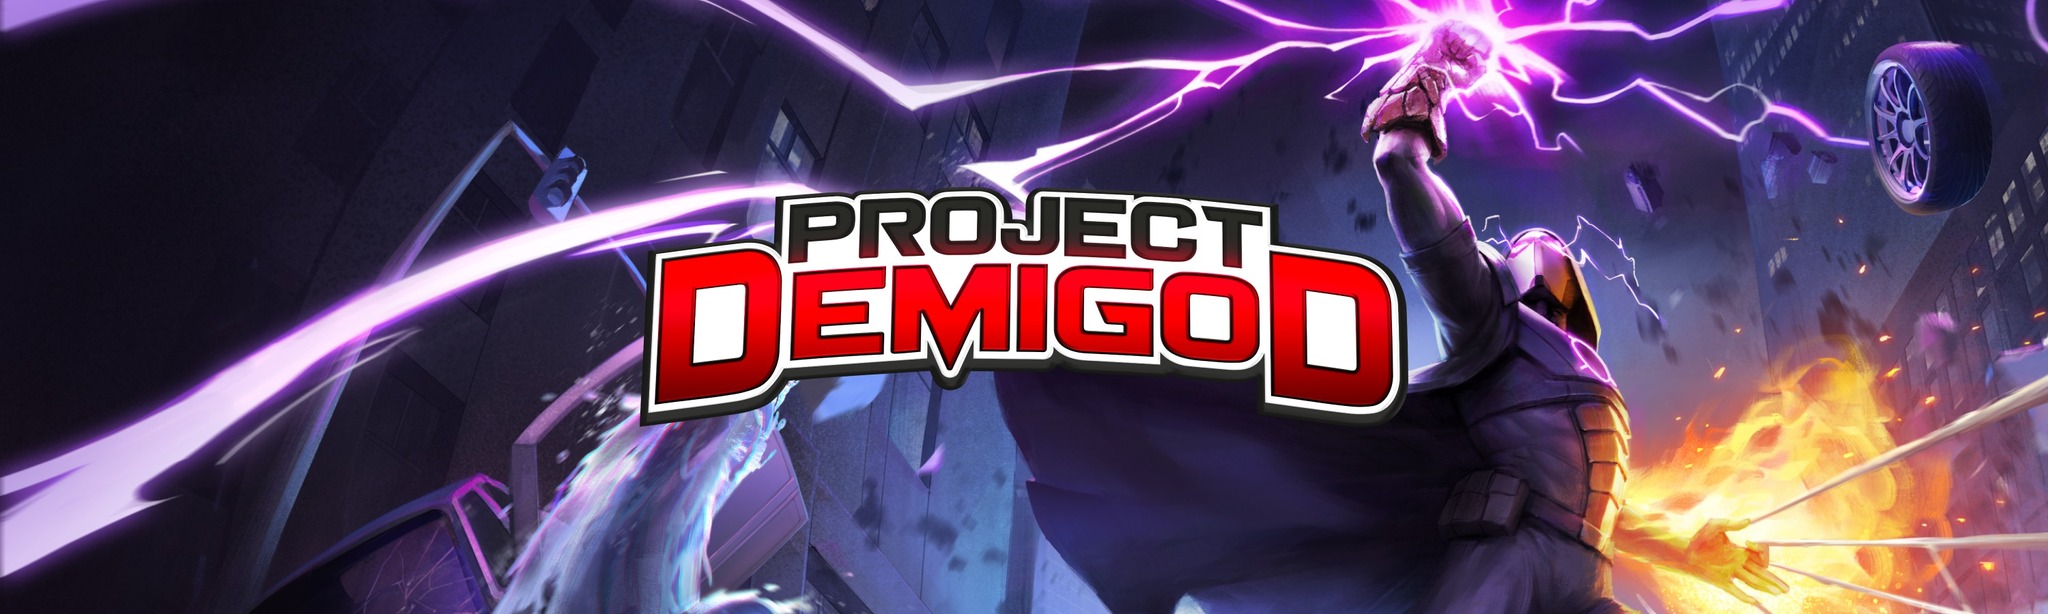 Ready go to ... https://sidequestvr.com/app/7586/project-demigod-demo [ Project Demigod - Demo on SideQuest - Oculus Quest Games & Apps including AppLab Games ( Oculus App Lab )]